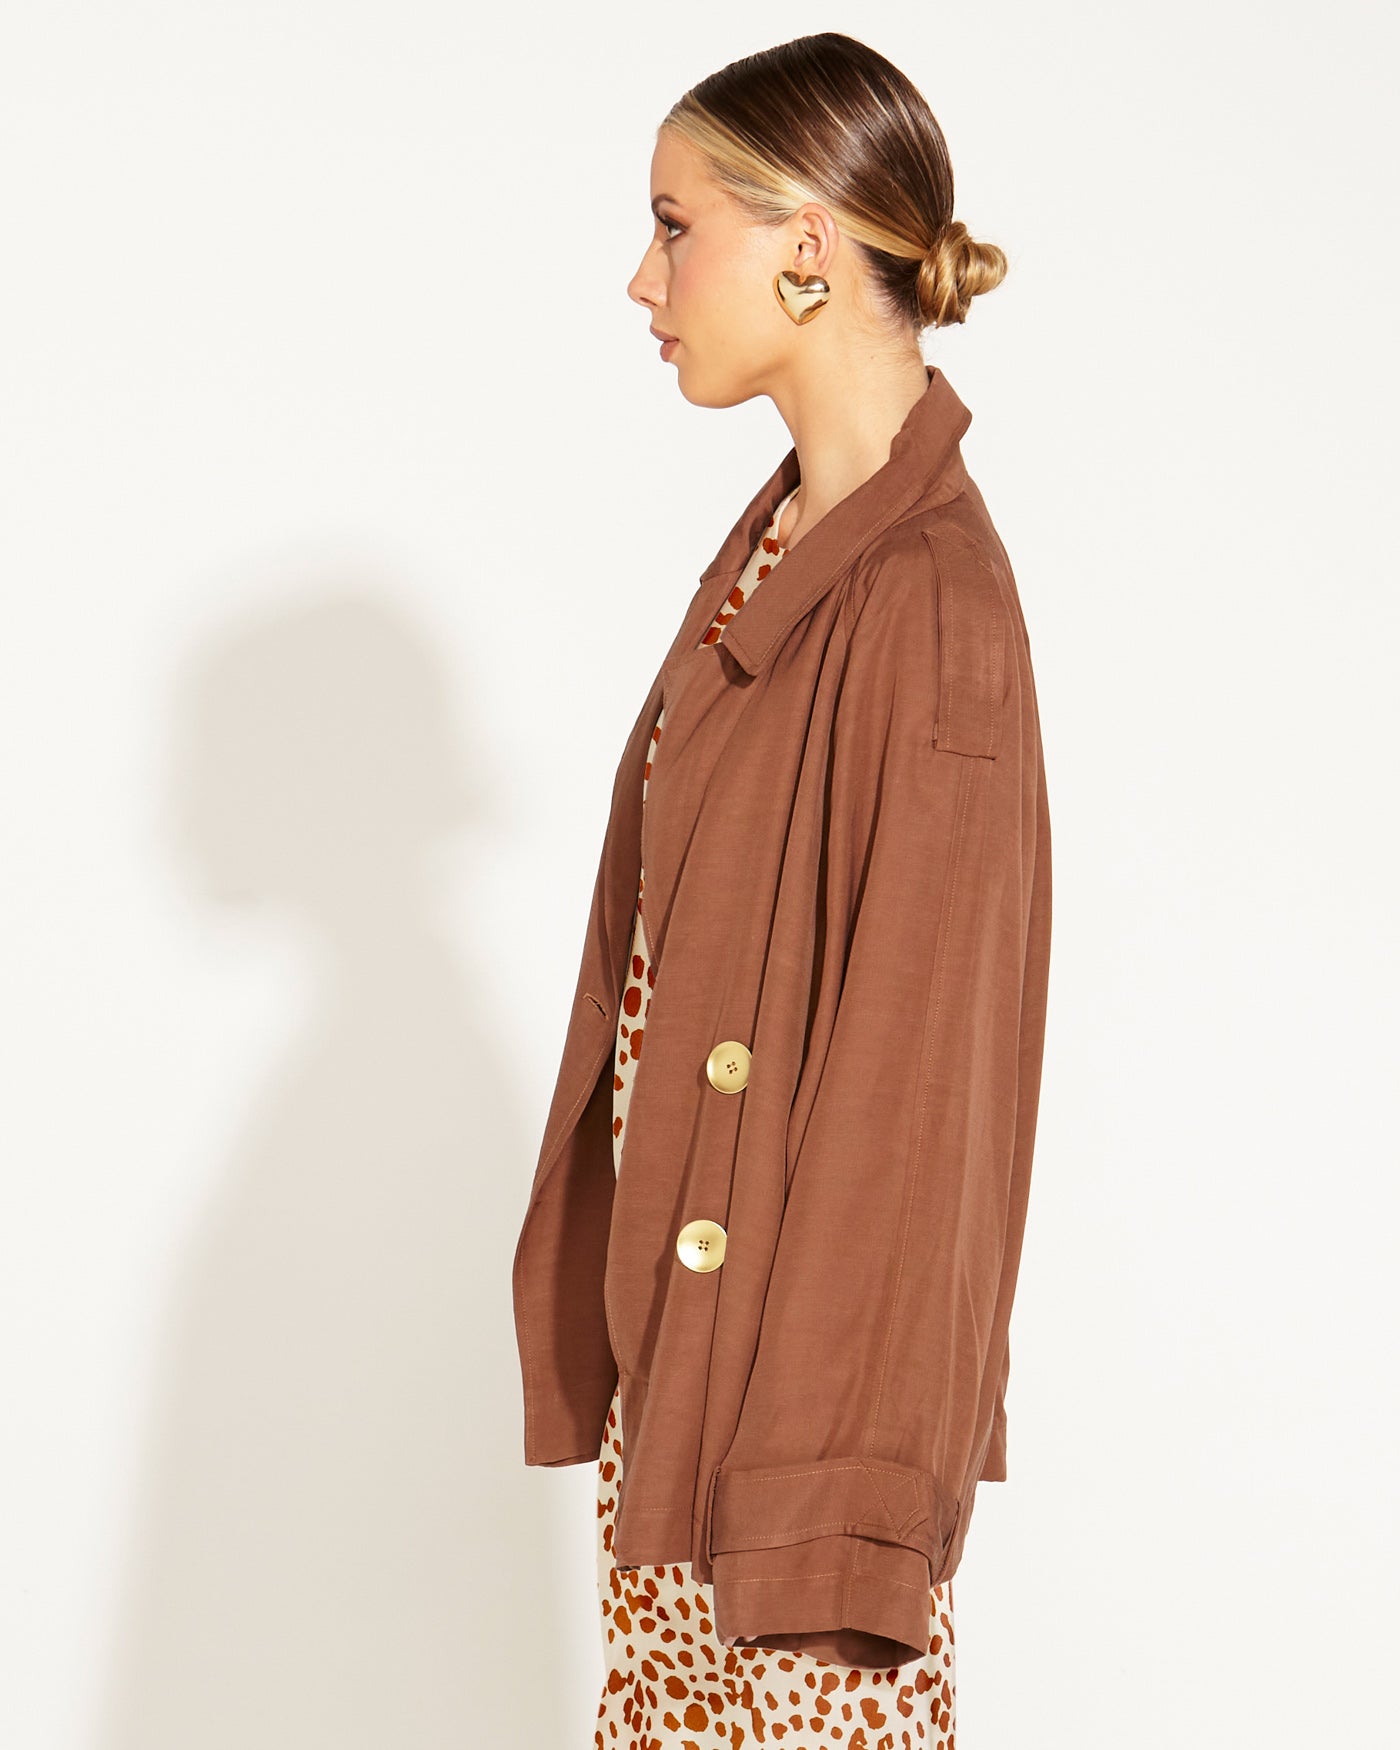 Fate+Becker One And Only Oversized Blazer - Mocha